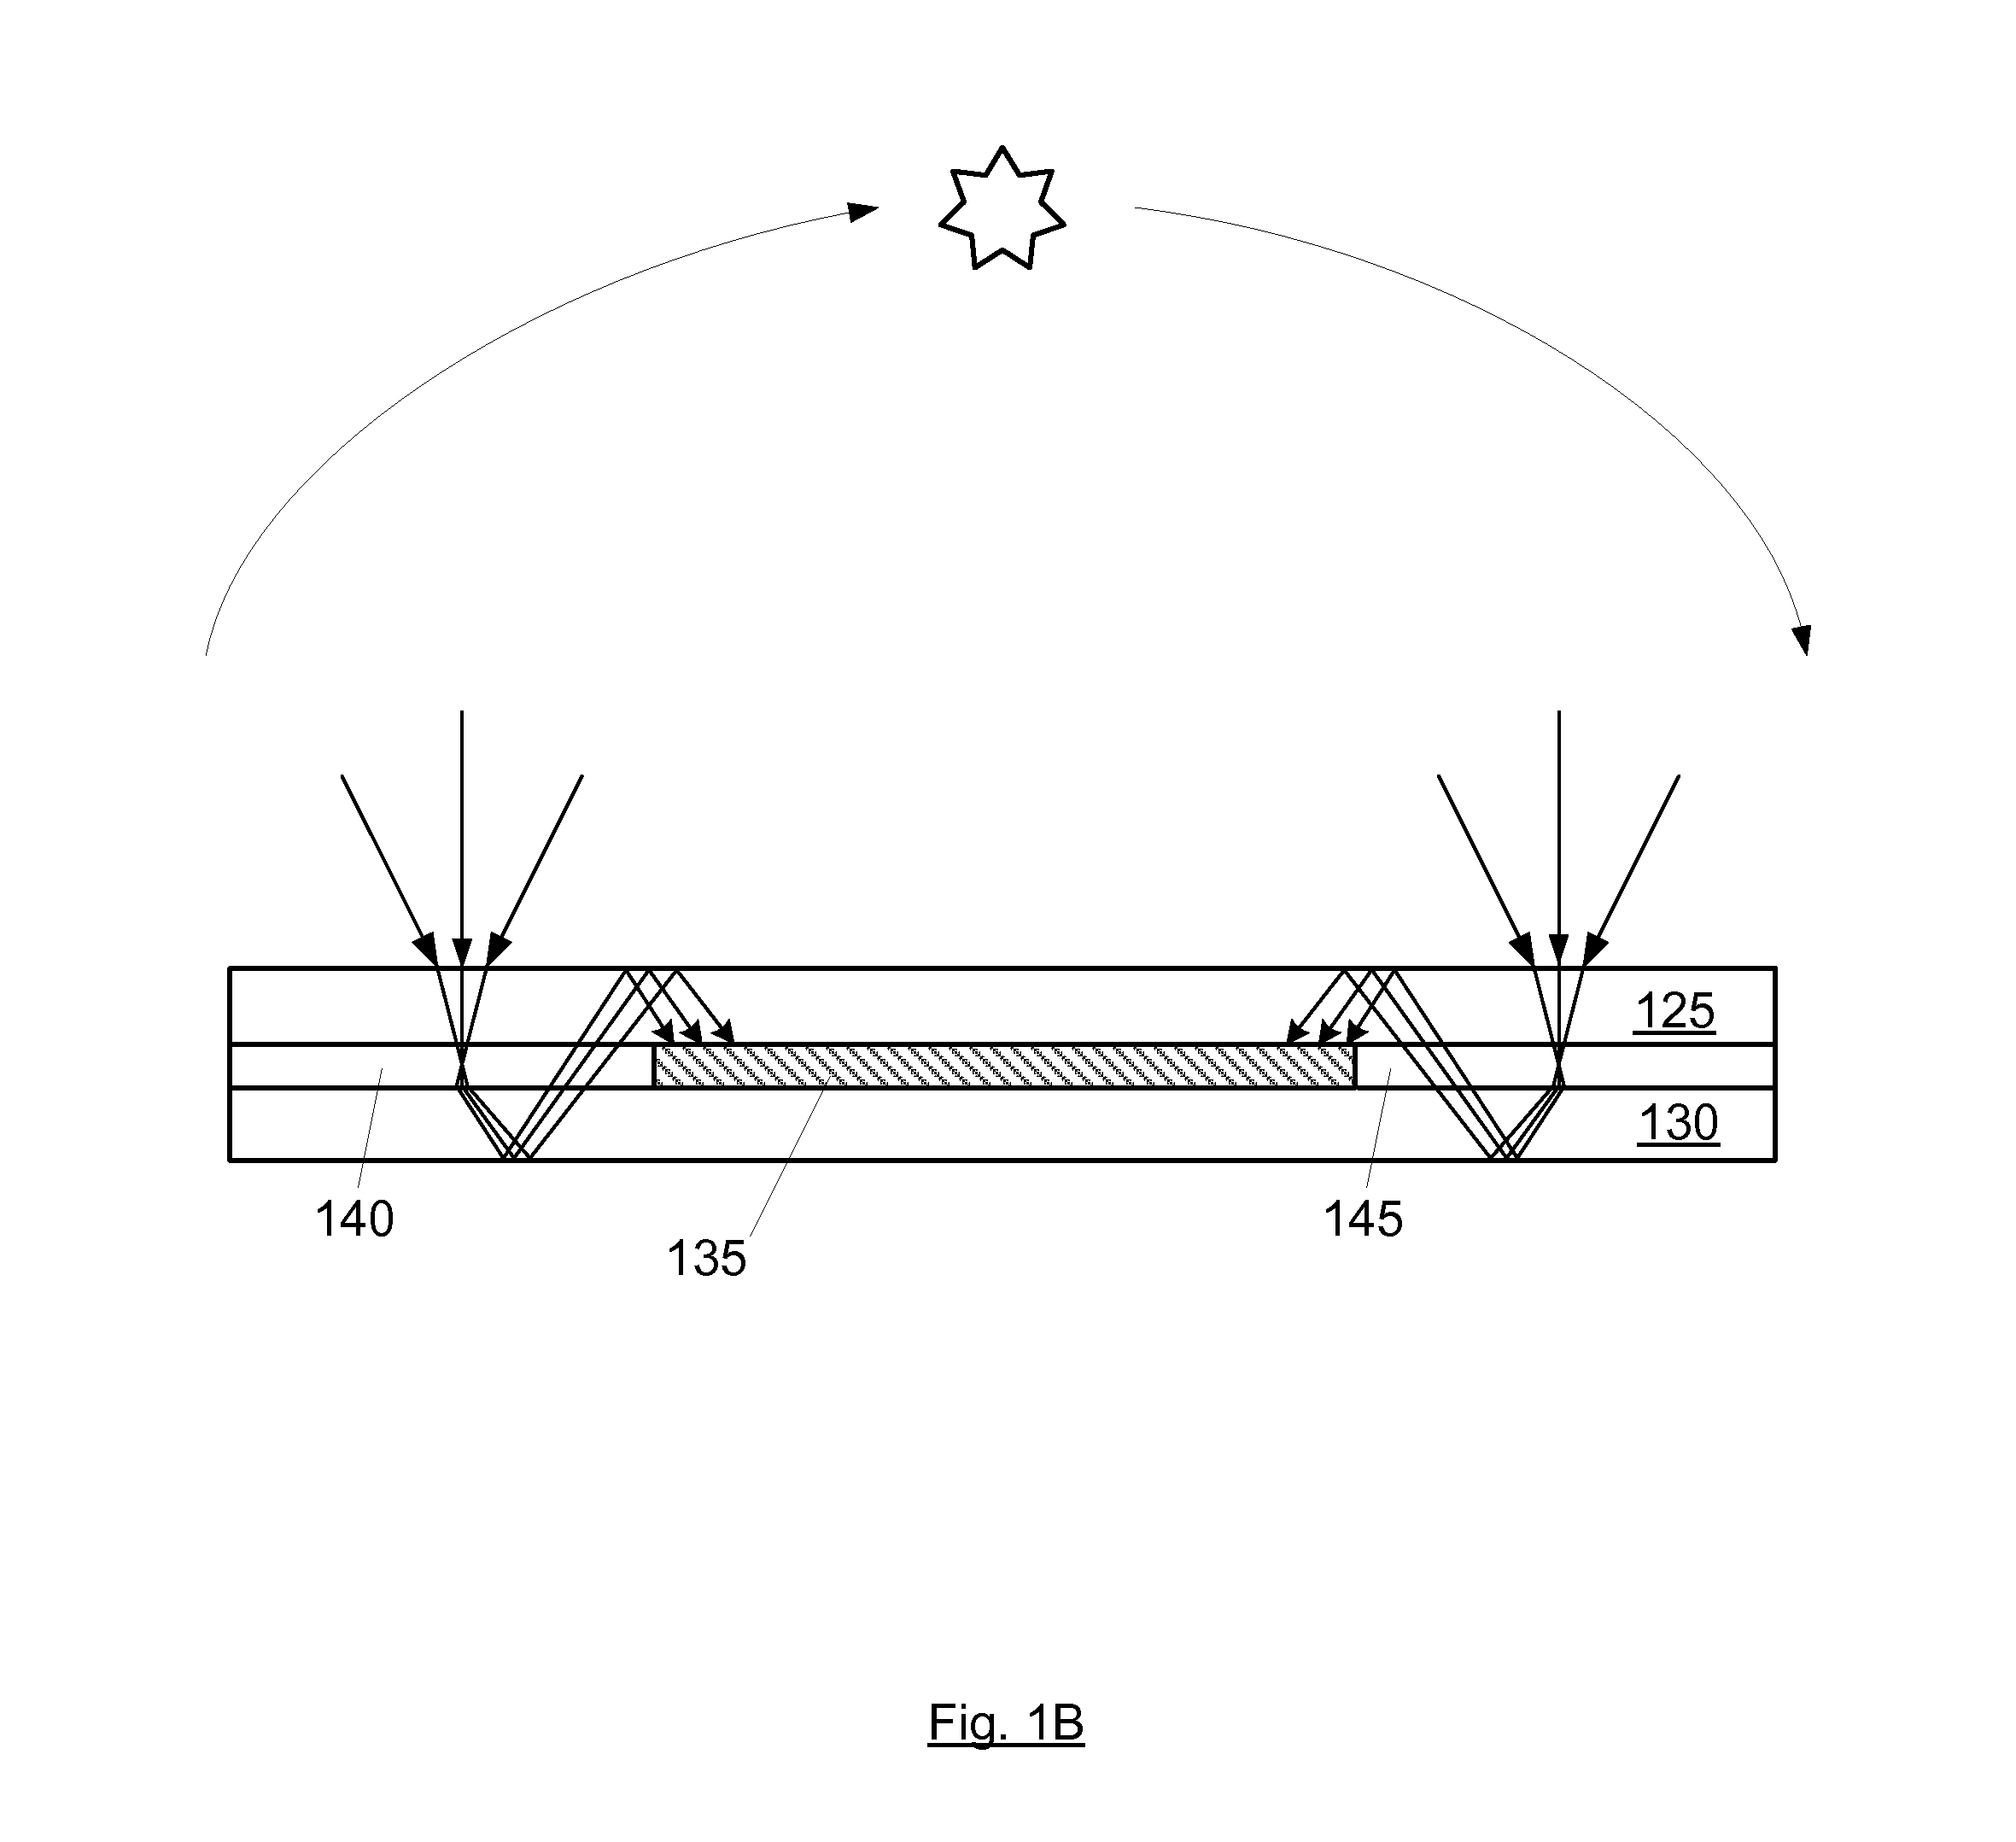 Non-latitude and vertically mounted solar energy concentrators